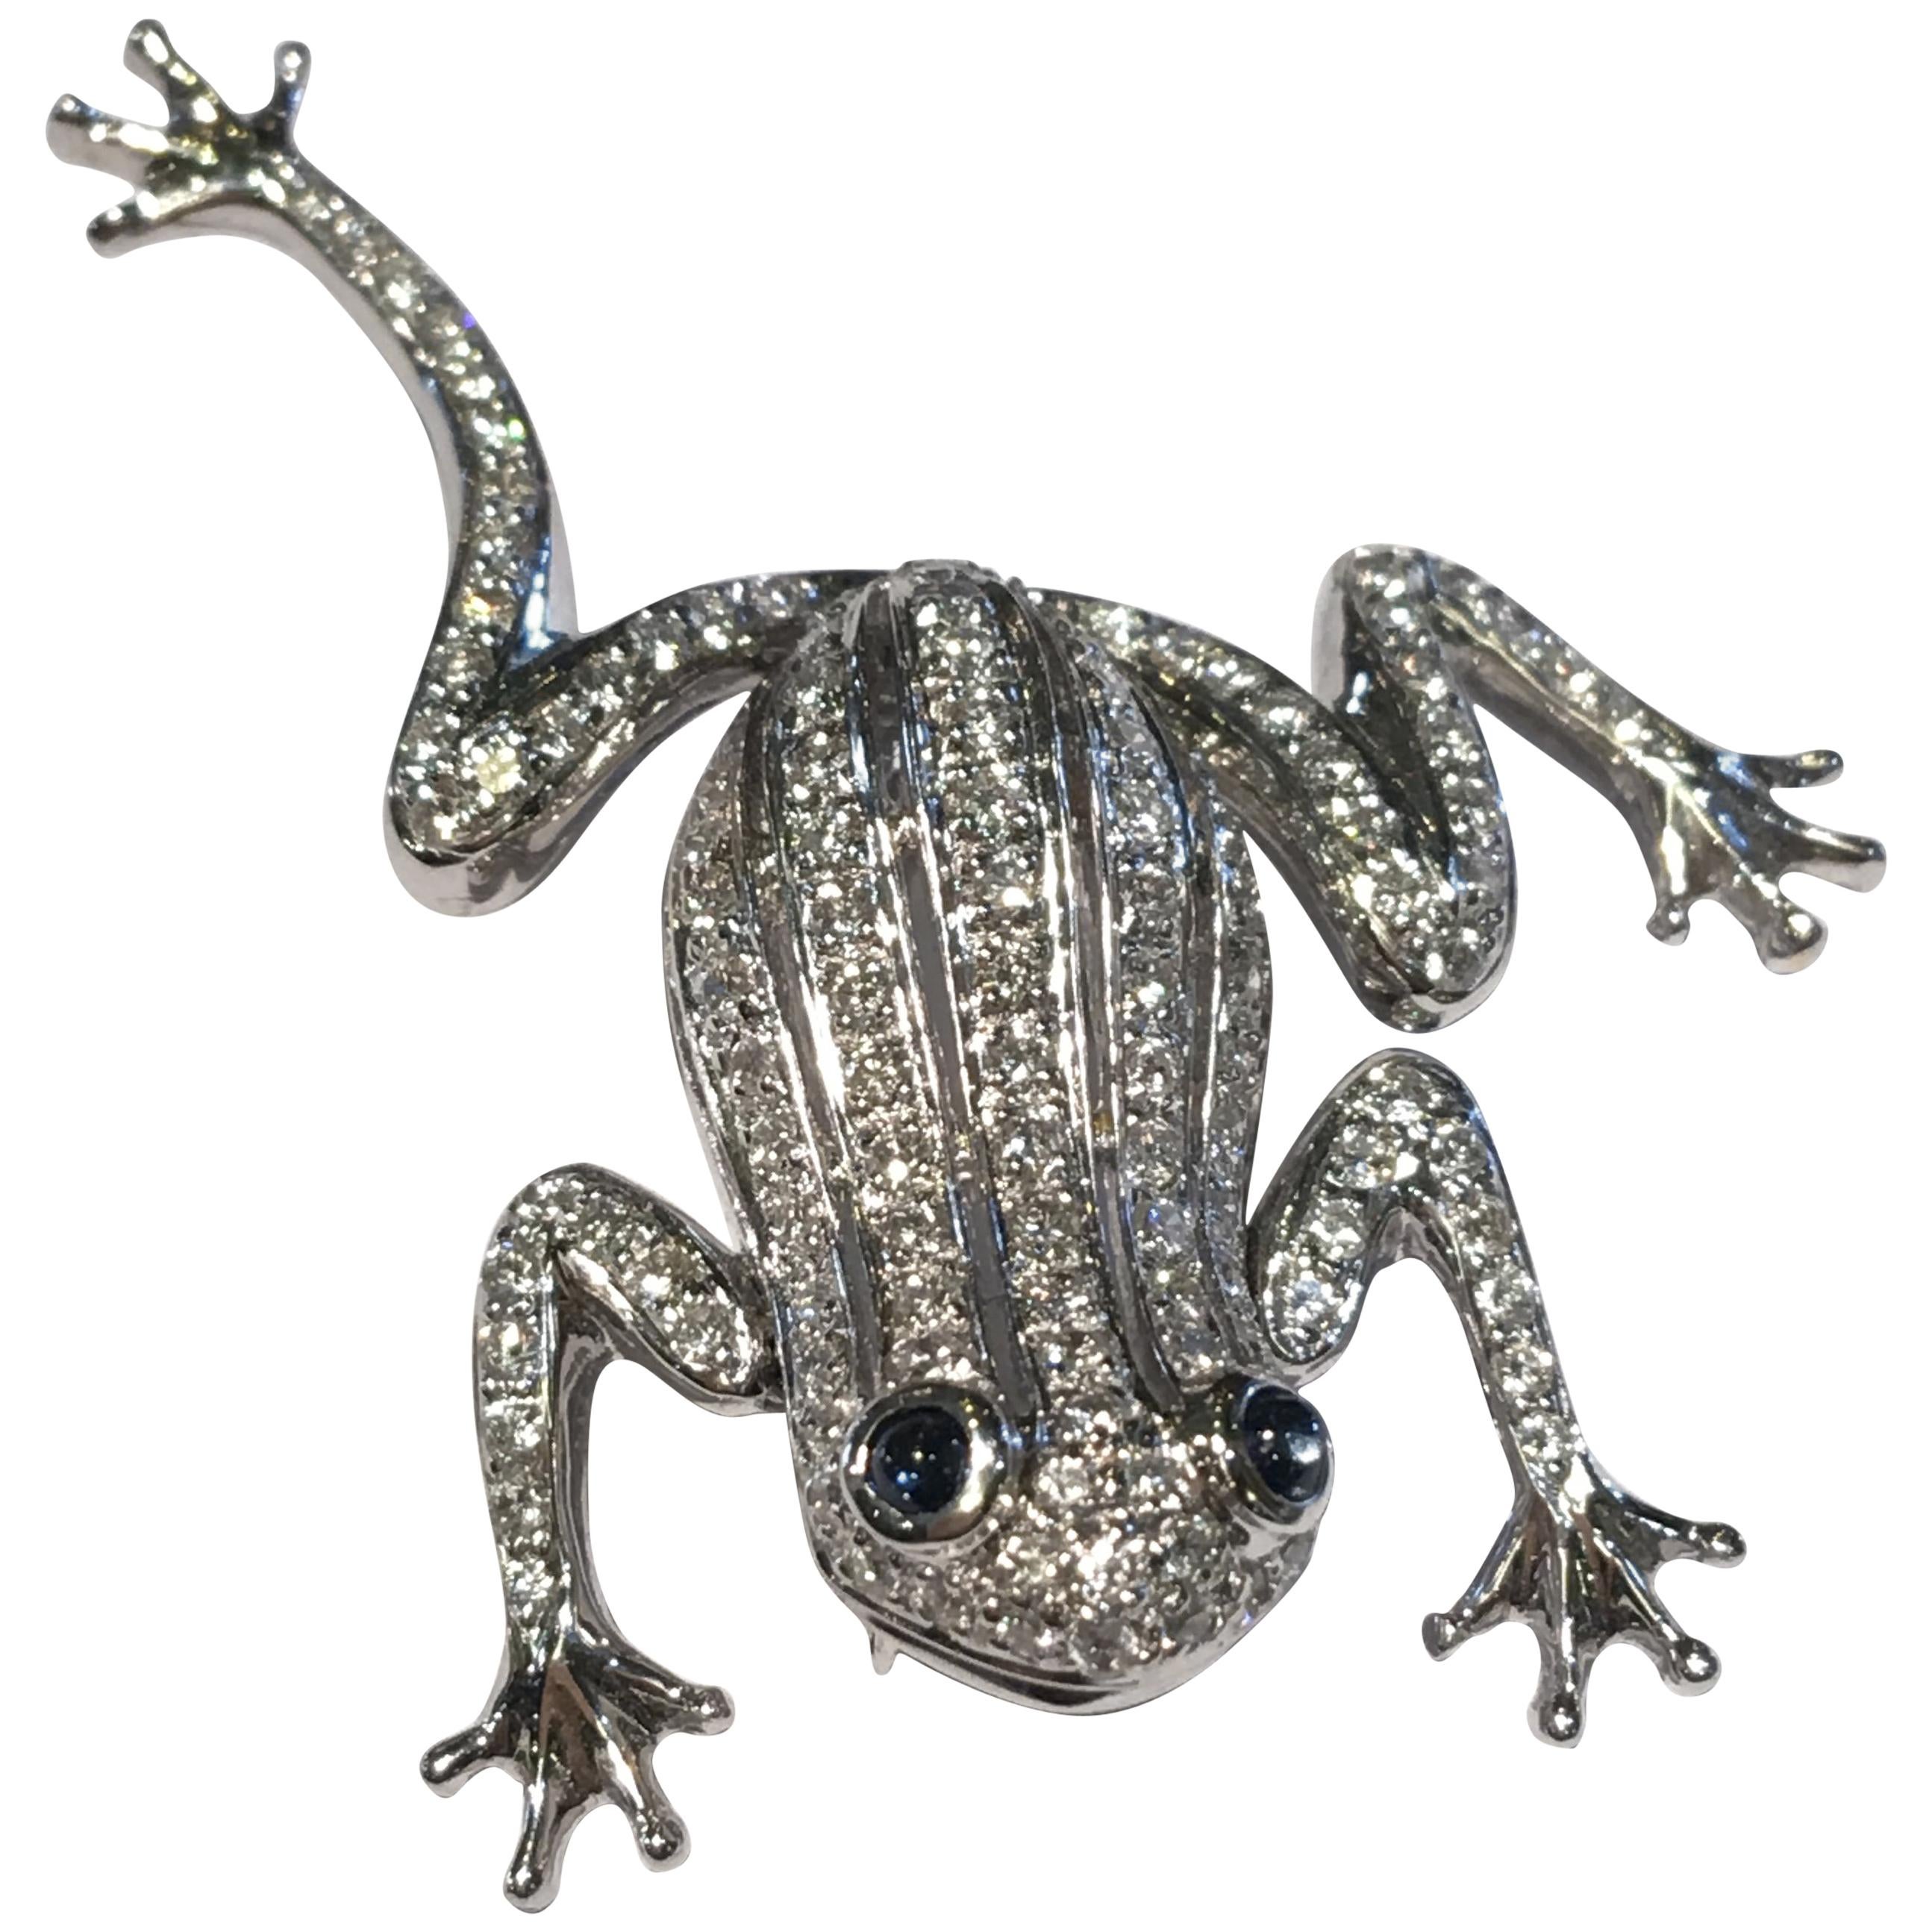 18 Karat White Gold Diamond Frog with Sapphire Cabochon Eyes Moving Limbs Brooch